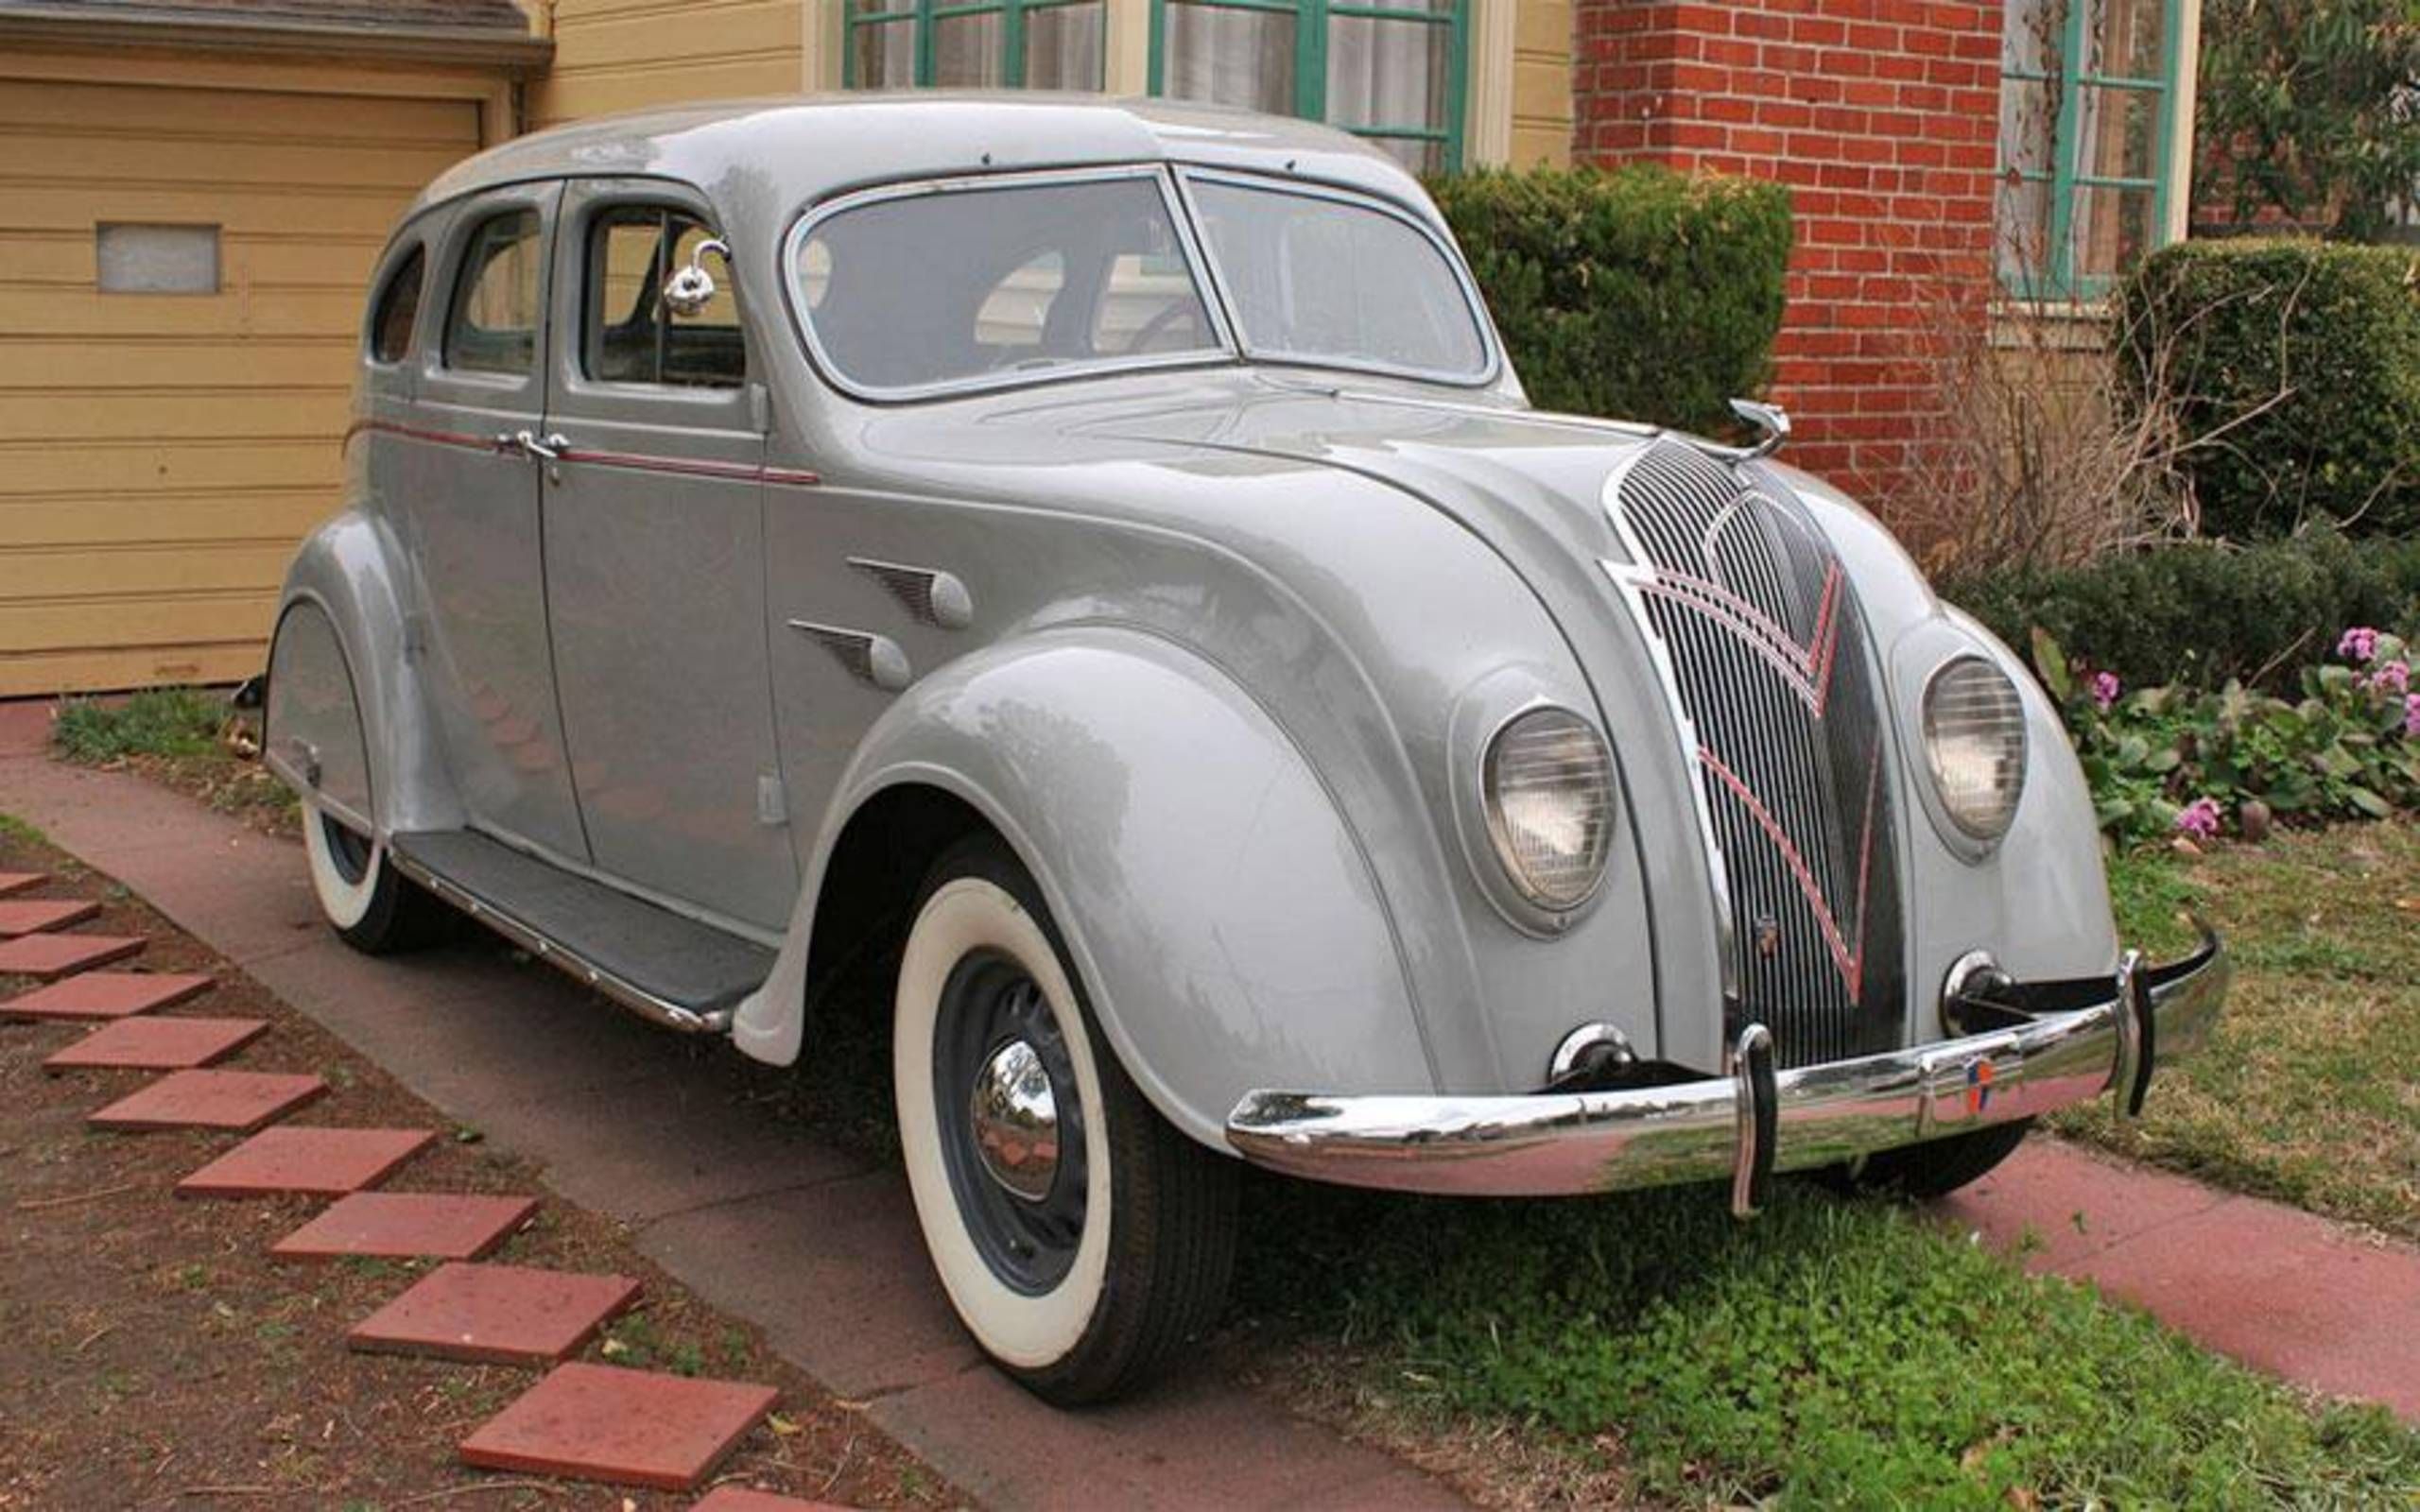 Act fast: 1936 DeSoto Airflow going once, going twice...